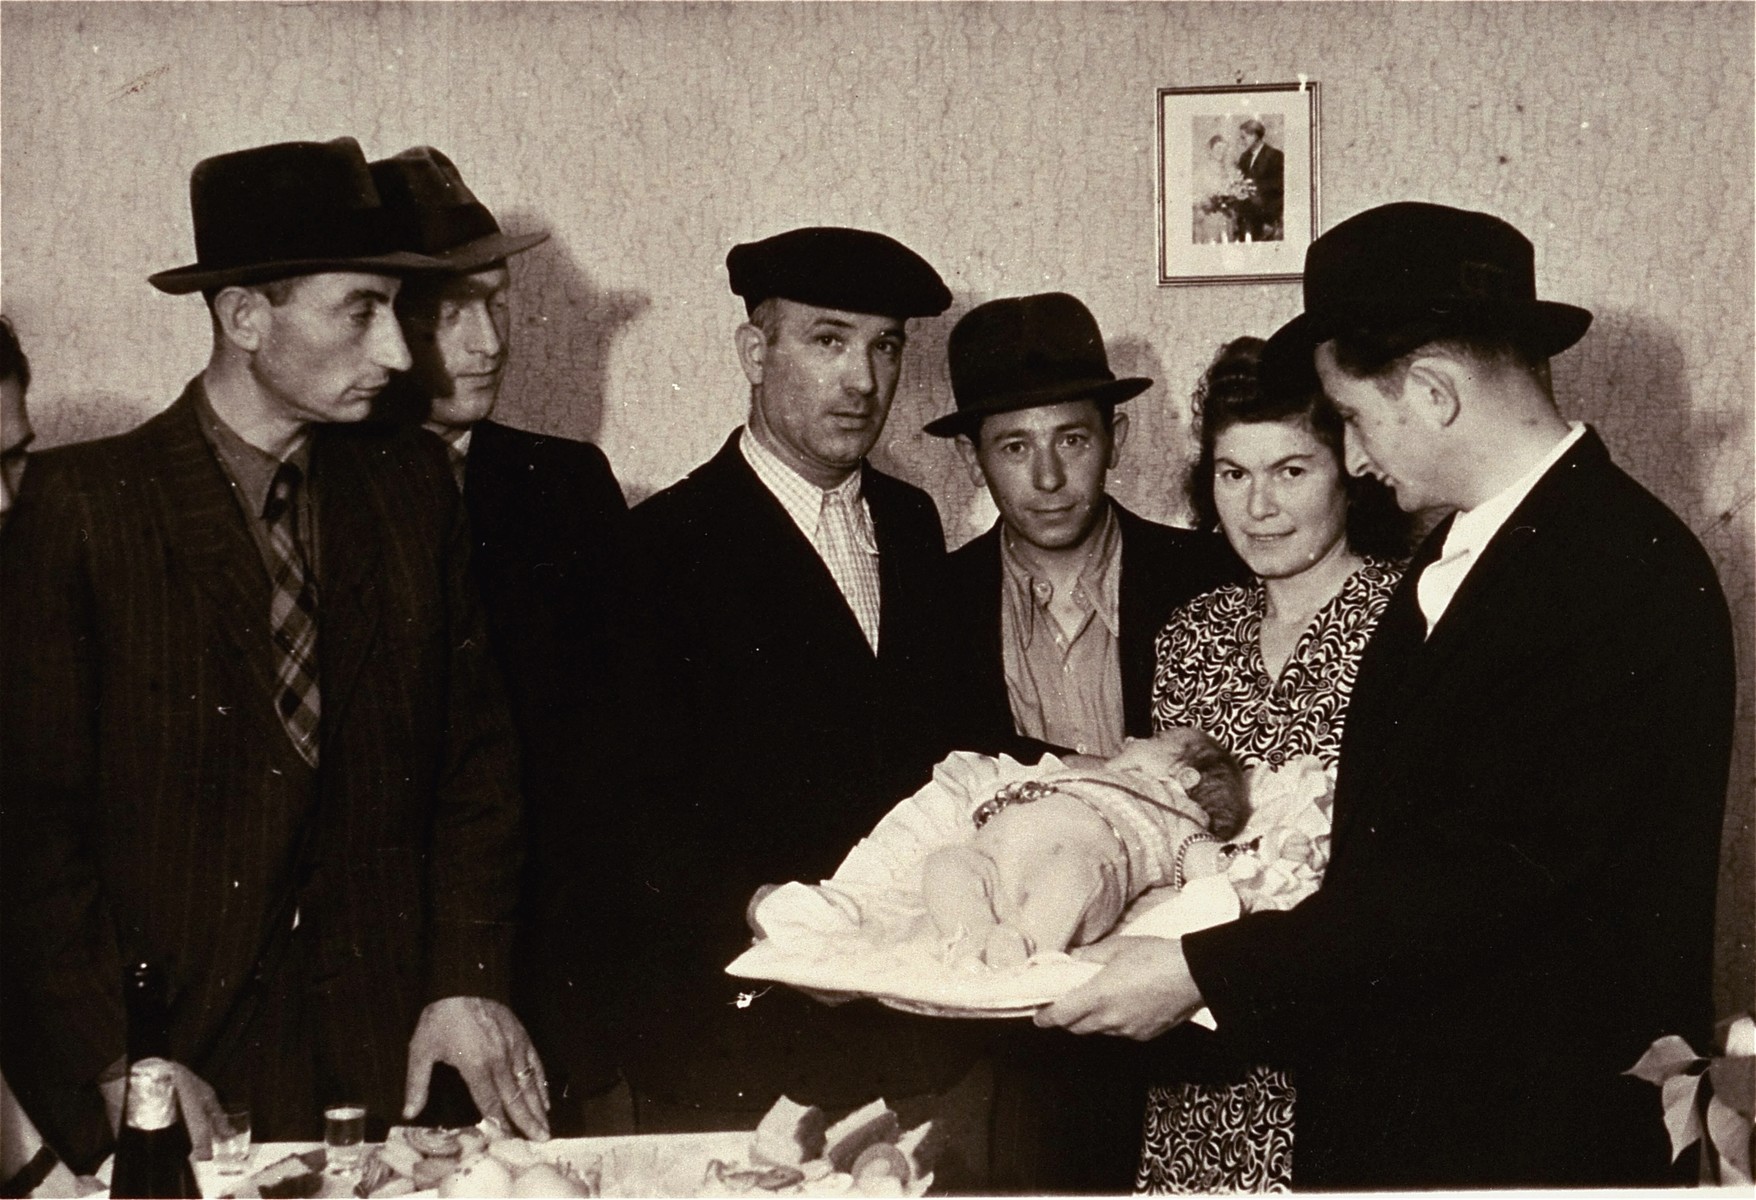 A Jewish couple in the Zeilsheim displaced persons camp with their newborn son celebrating the ceremony of Pidyon Haben, the symbolic redemption of a firstborn son with silver coins - sometimes replaced with jewelry - a tradition that dates back to antiquity and the Temple in Jerusalem.